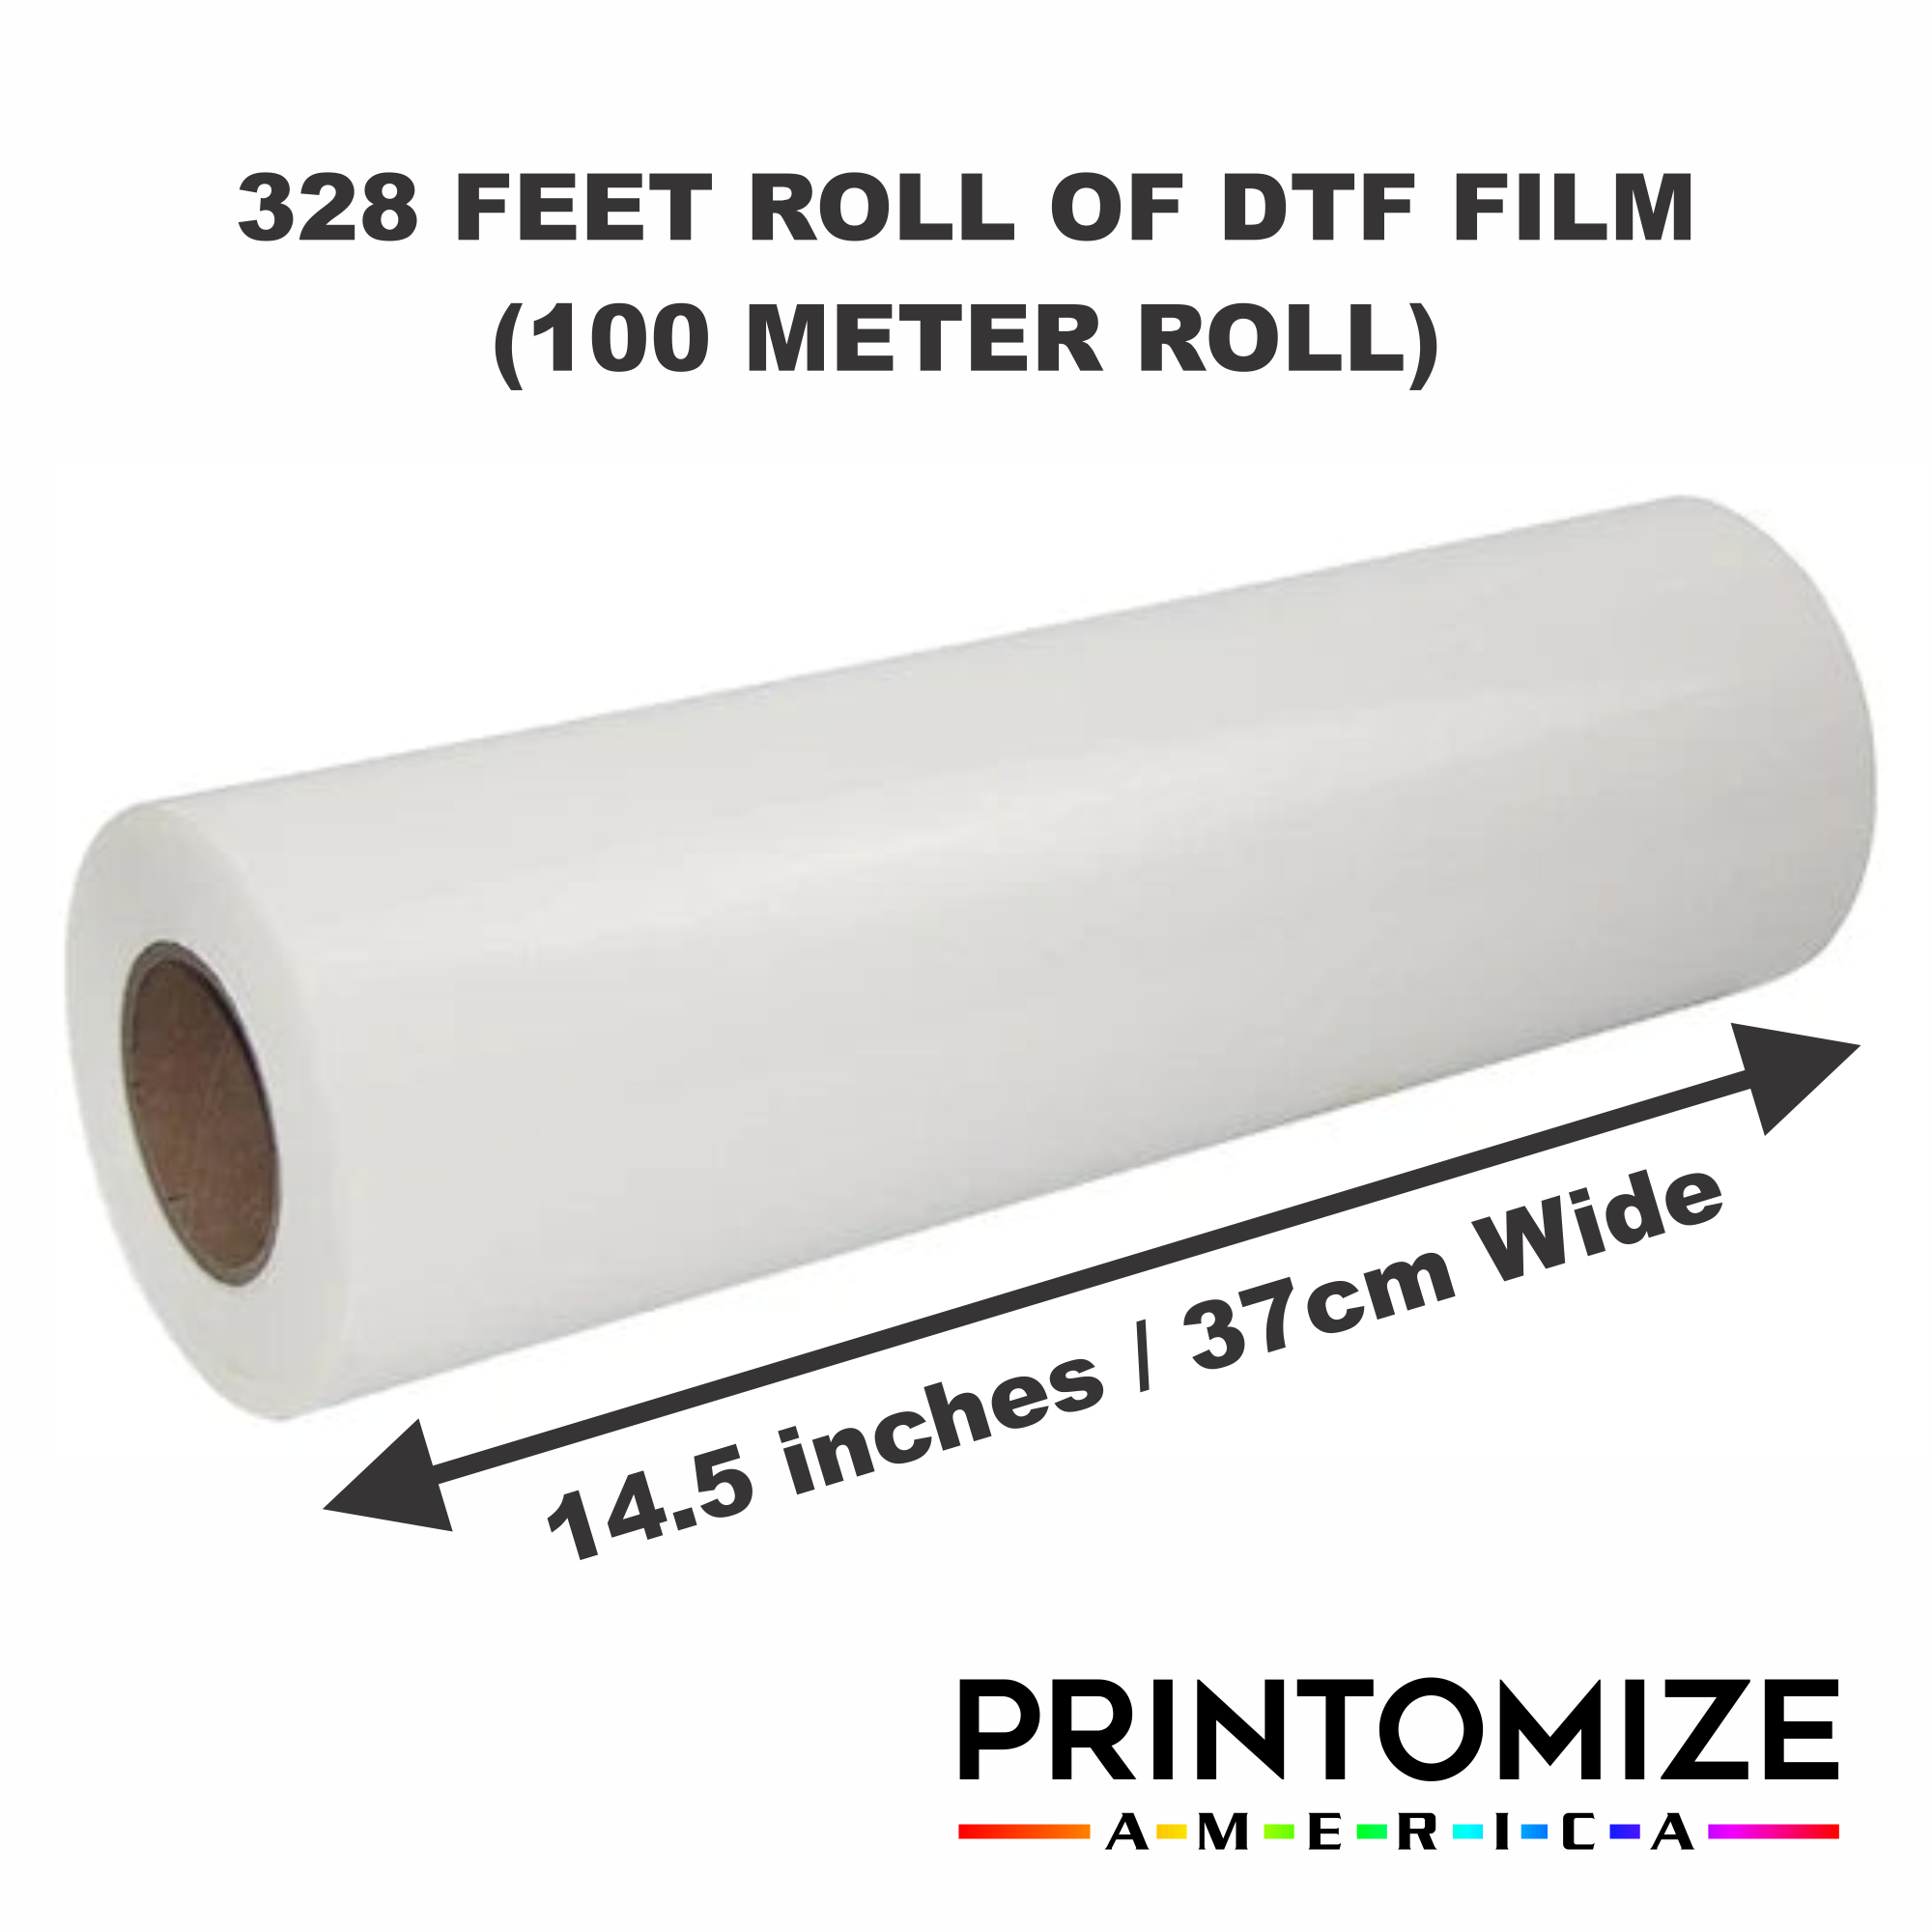 14.5” x 328 Feet Roll Of DTF Film – Double Sided Cold/Warm Peel